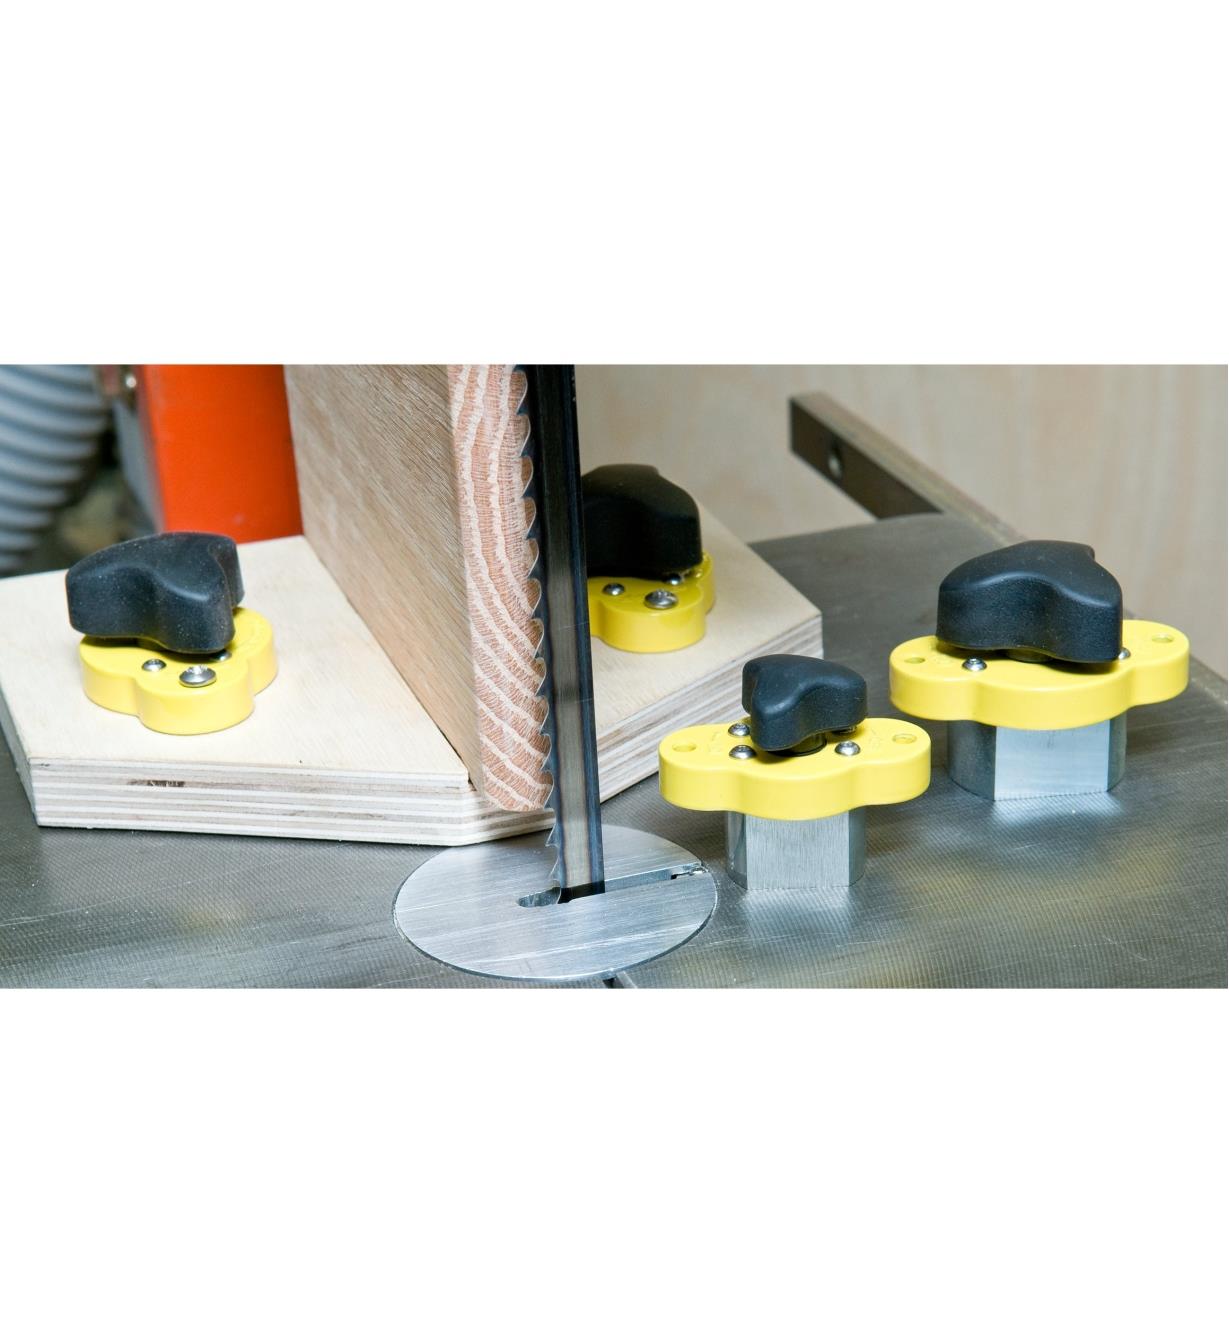 Magnetic clamps installed on a re-sawing jig on a bandsaw table